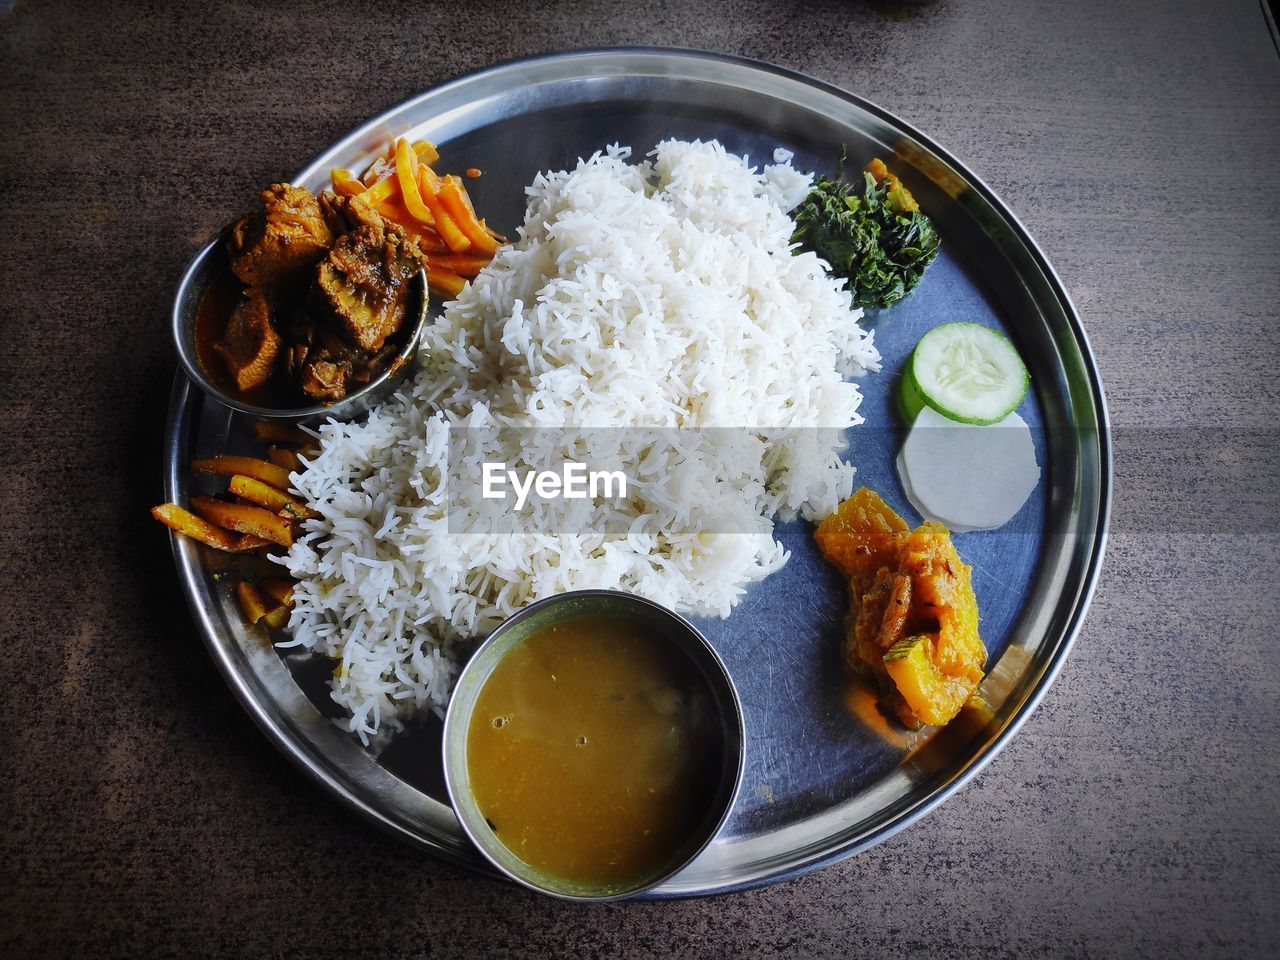 HIGH ANGLE VIEW OF MEAL SERVED IN PLATE